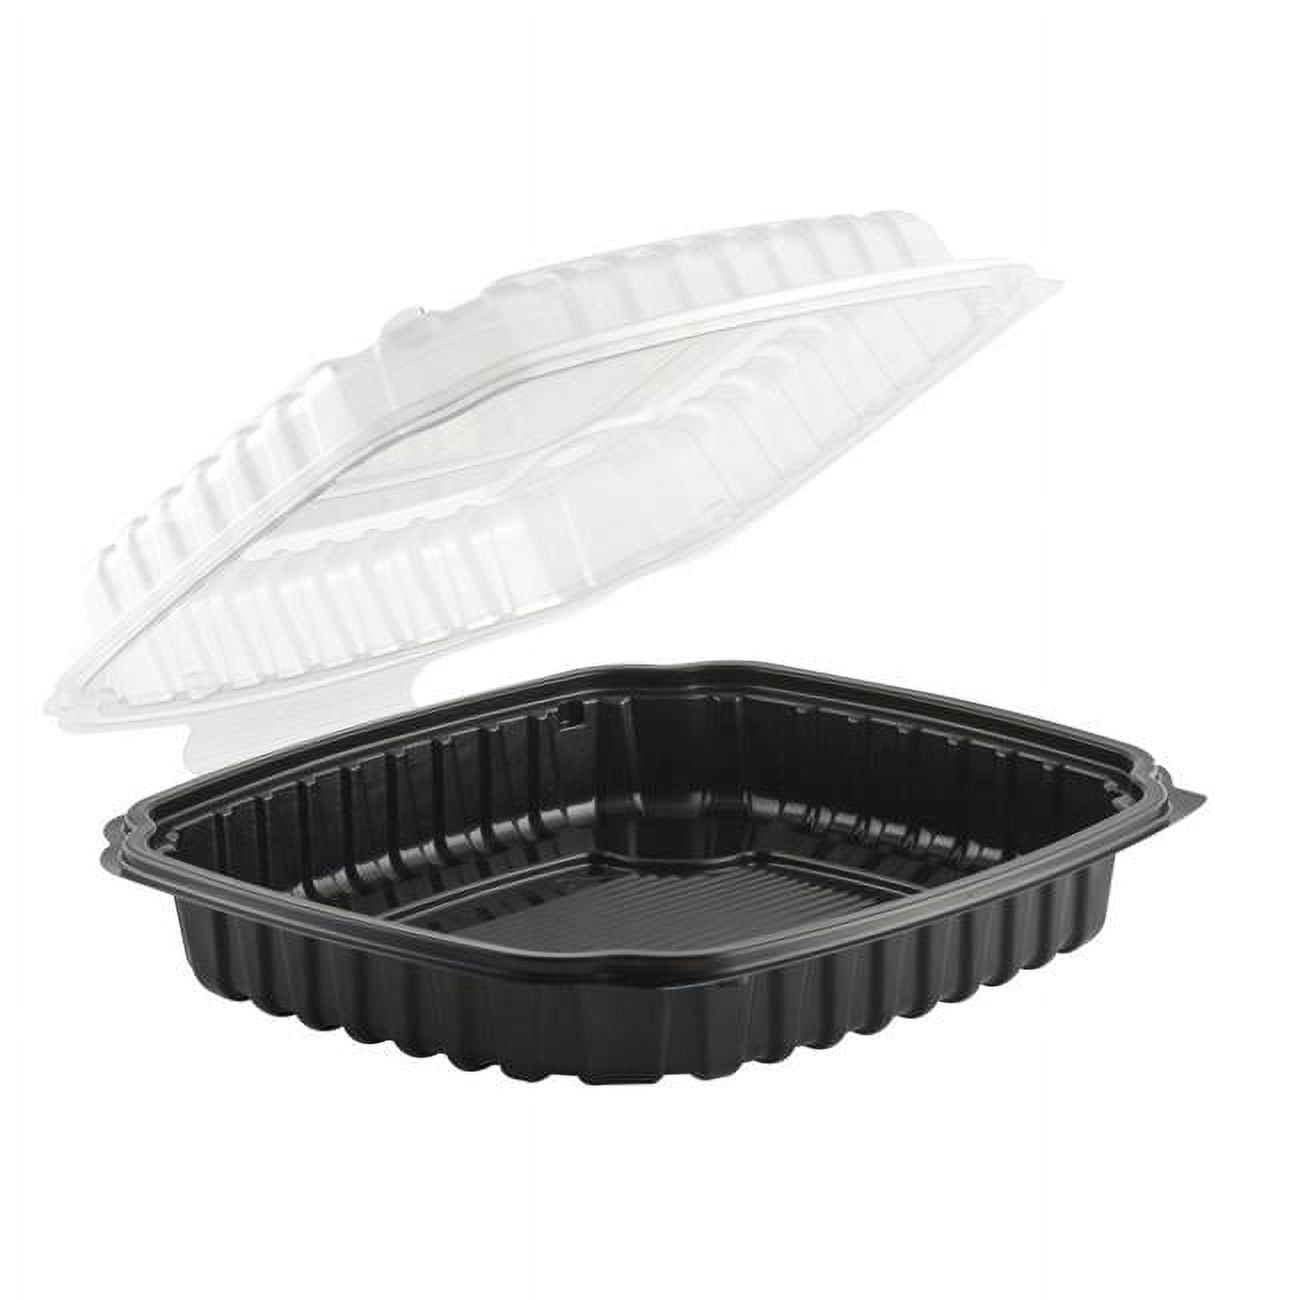 4669911 Cpc 9 X 9 In. 1-compartment Black Base Clear Lid - Case Of 100